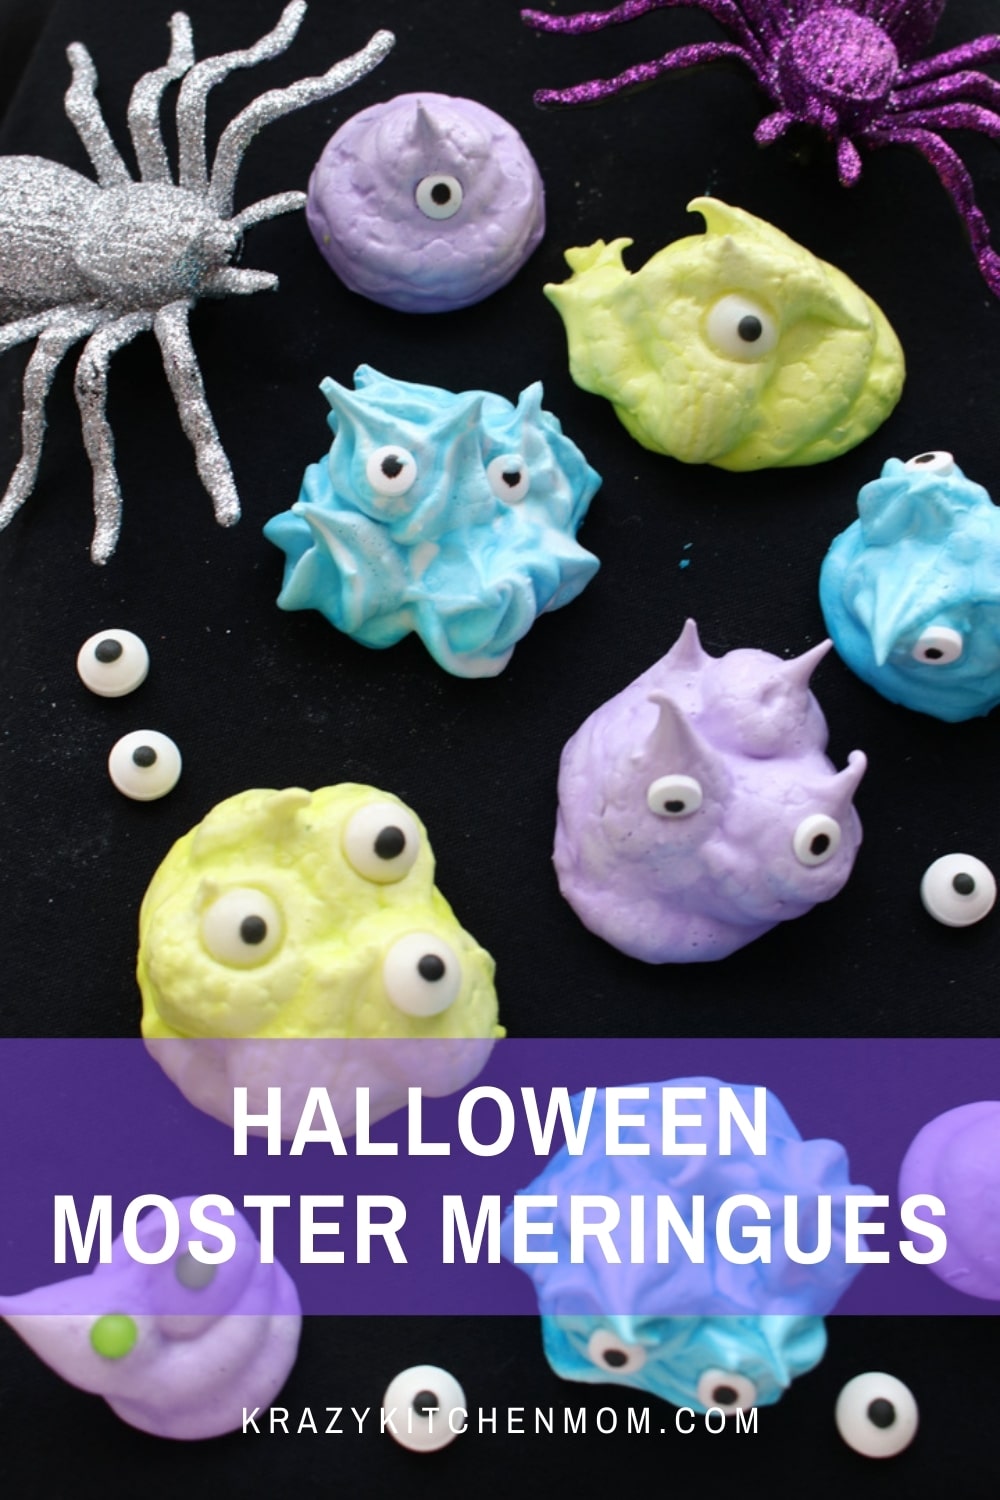 These meringue cookies are melt-in-your-mouth sweet little treats dressed up as cute eyeball monsters for Halloween. via @krazykitchenmom